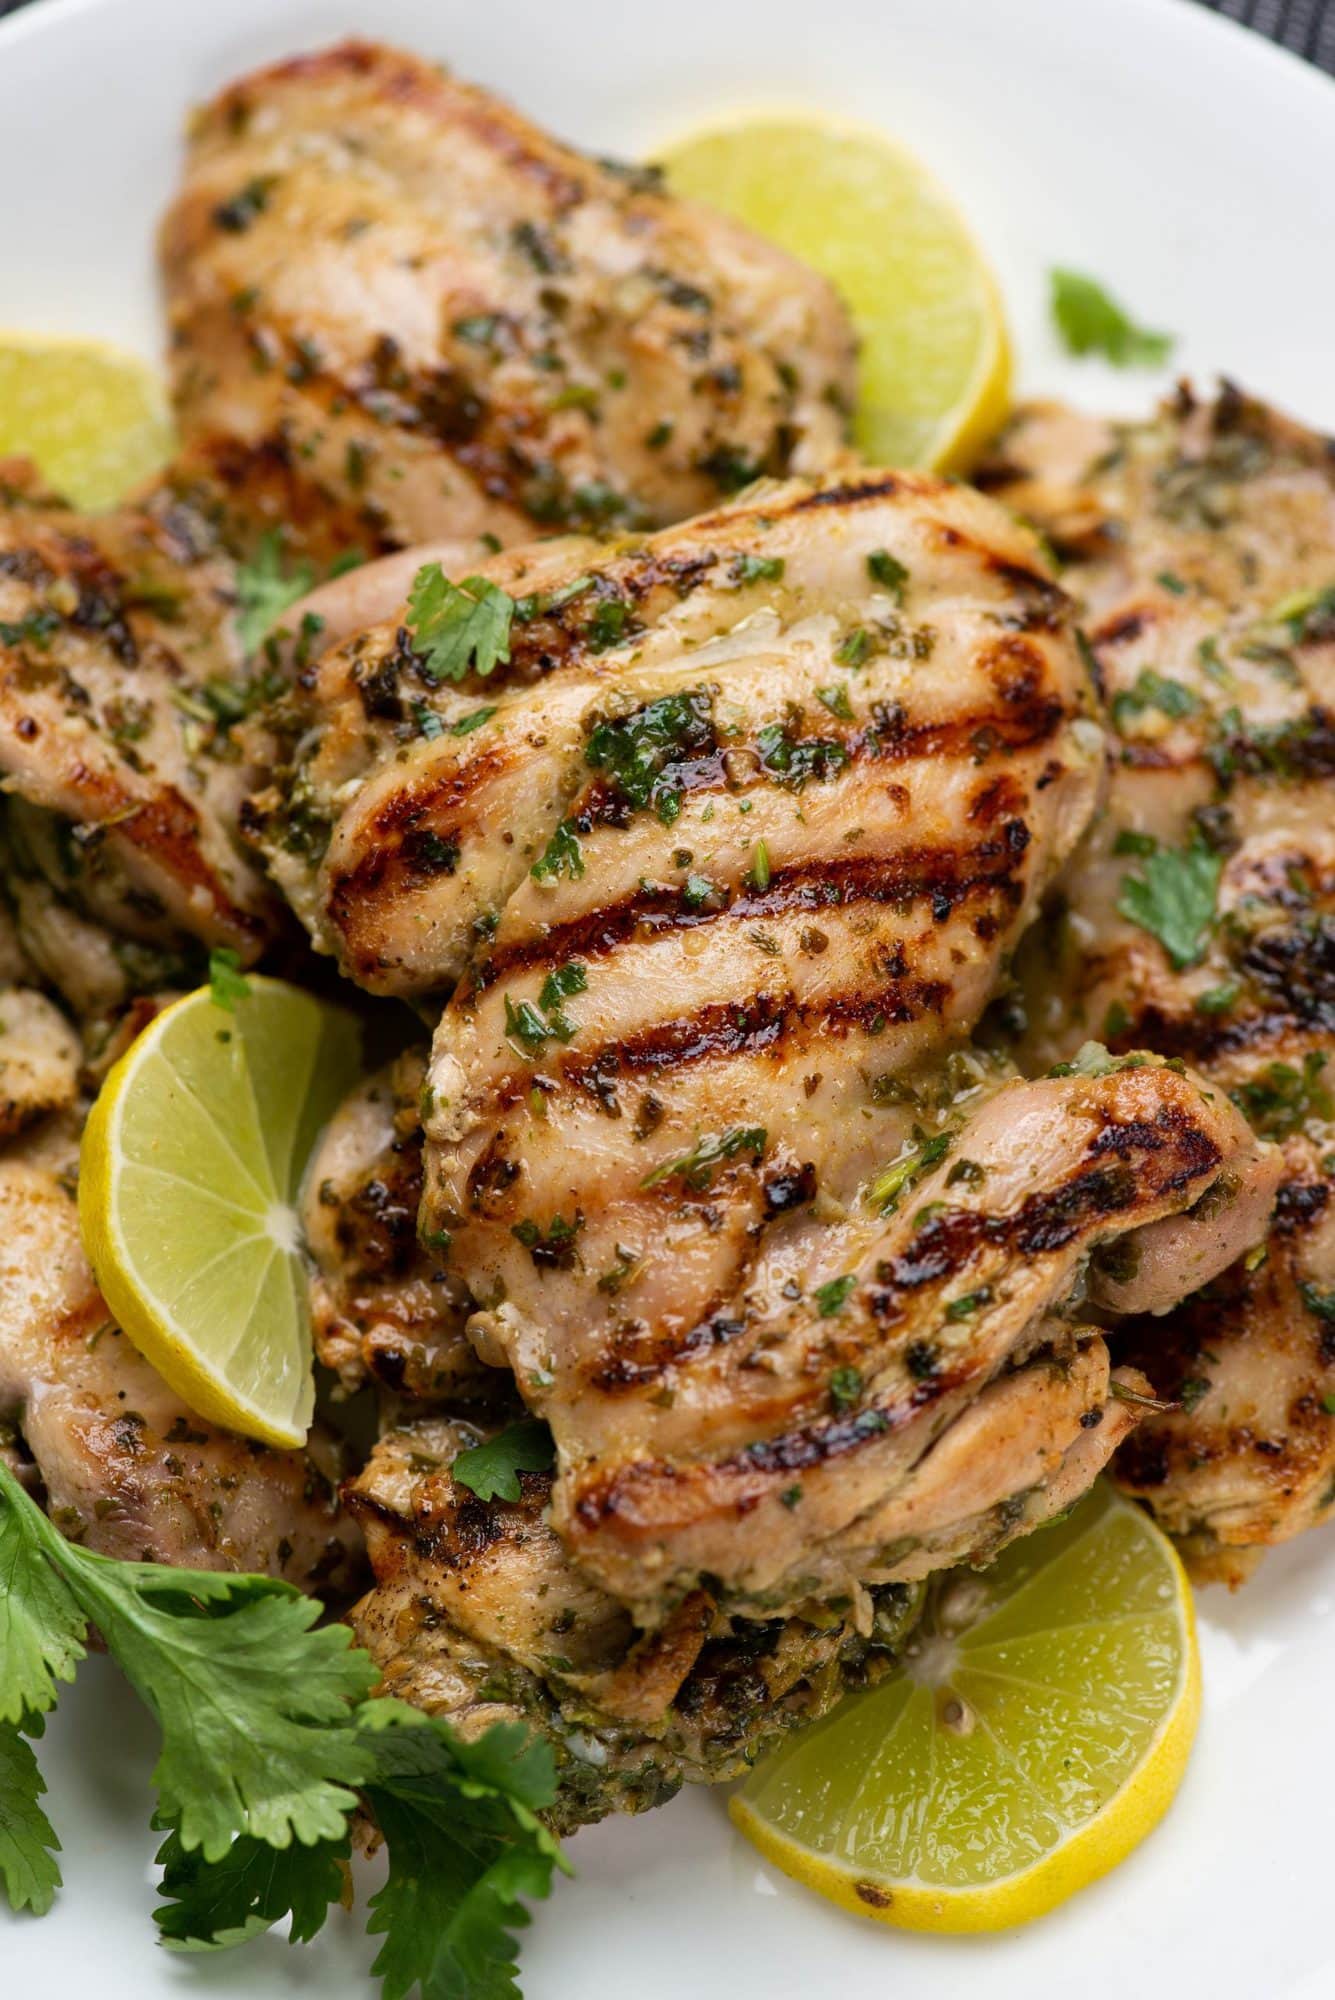 Chicken thighs are marinated in a zesty, bold marinade of cilantro, cumin, lime juice, and garlic, then grilled. With all the fresh flavors, this makes for a quick meal in summer or on any day for that matter. 